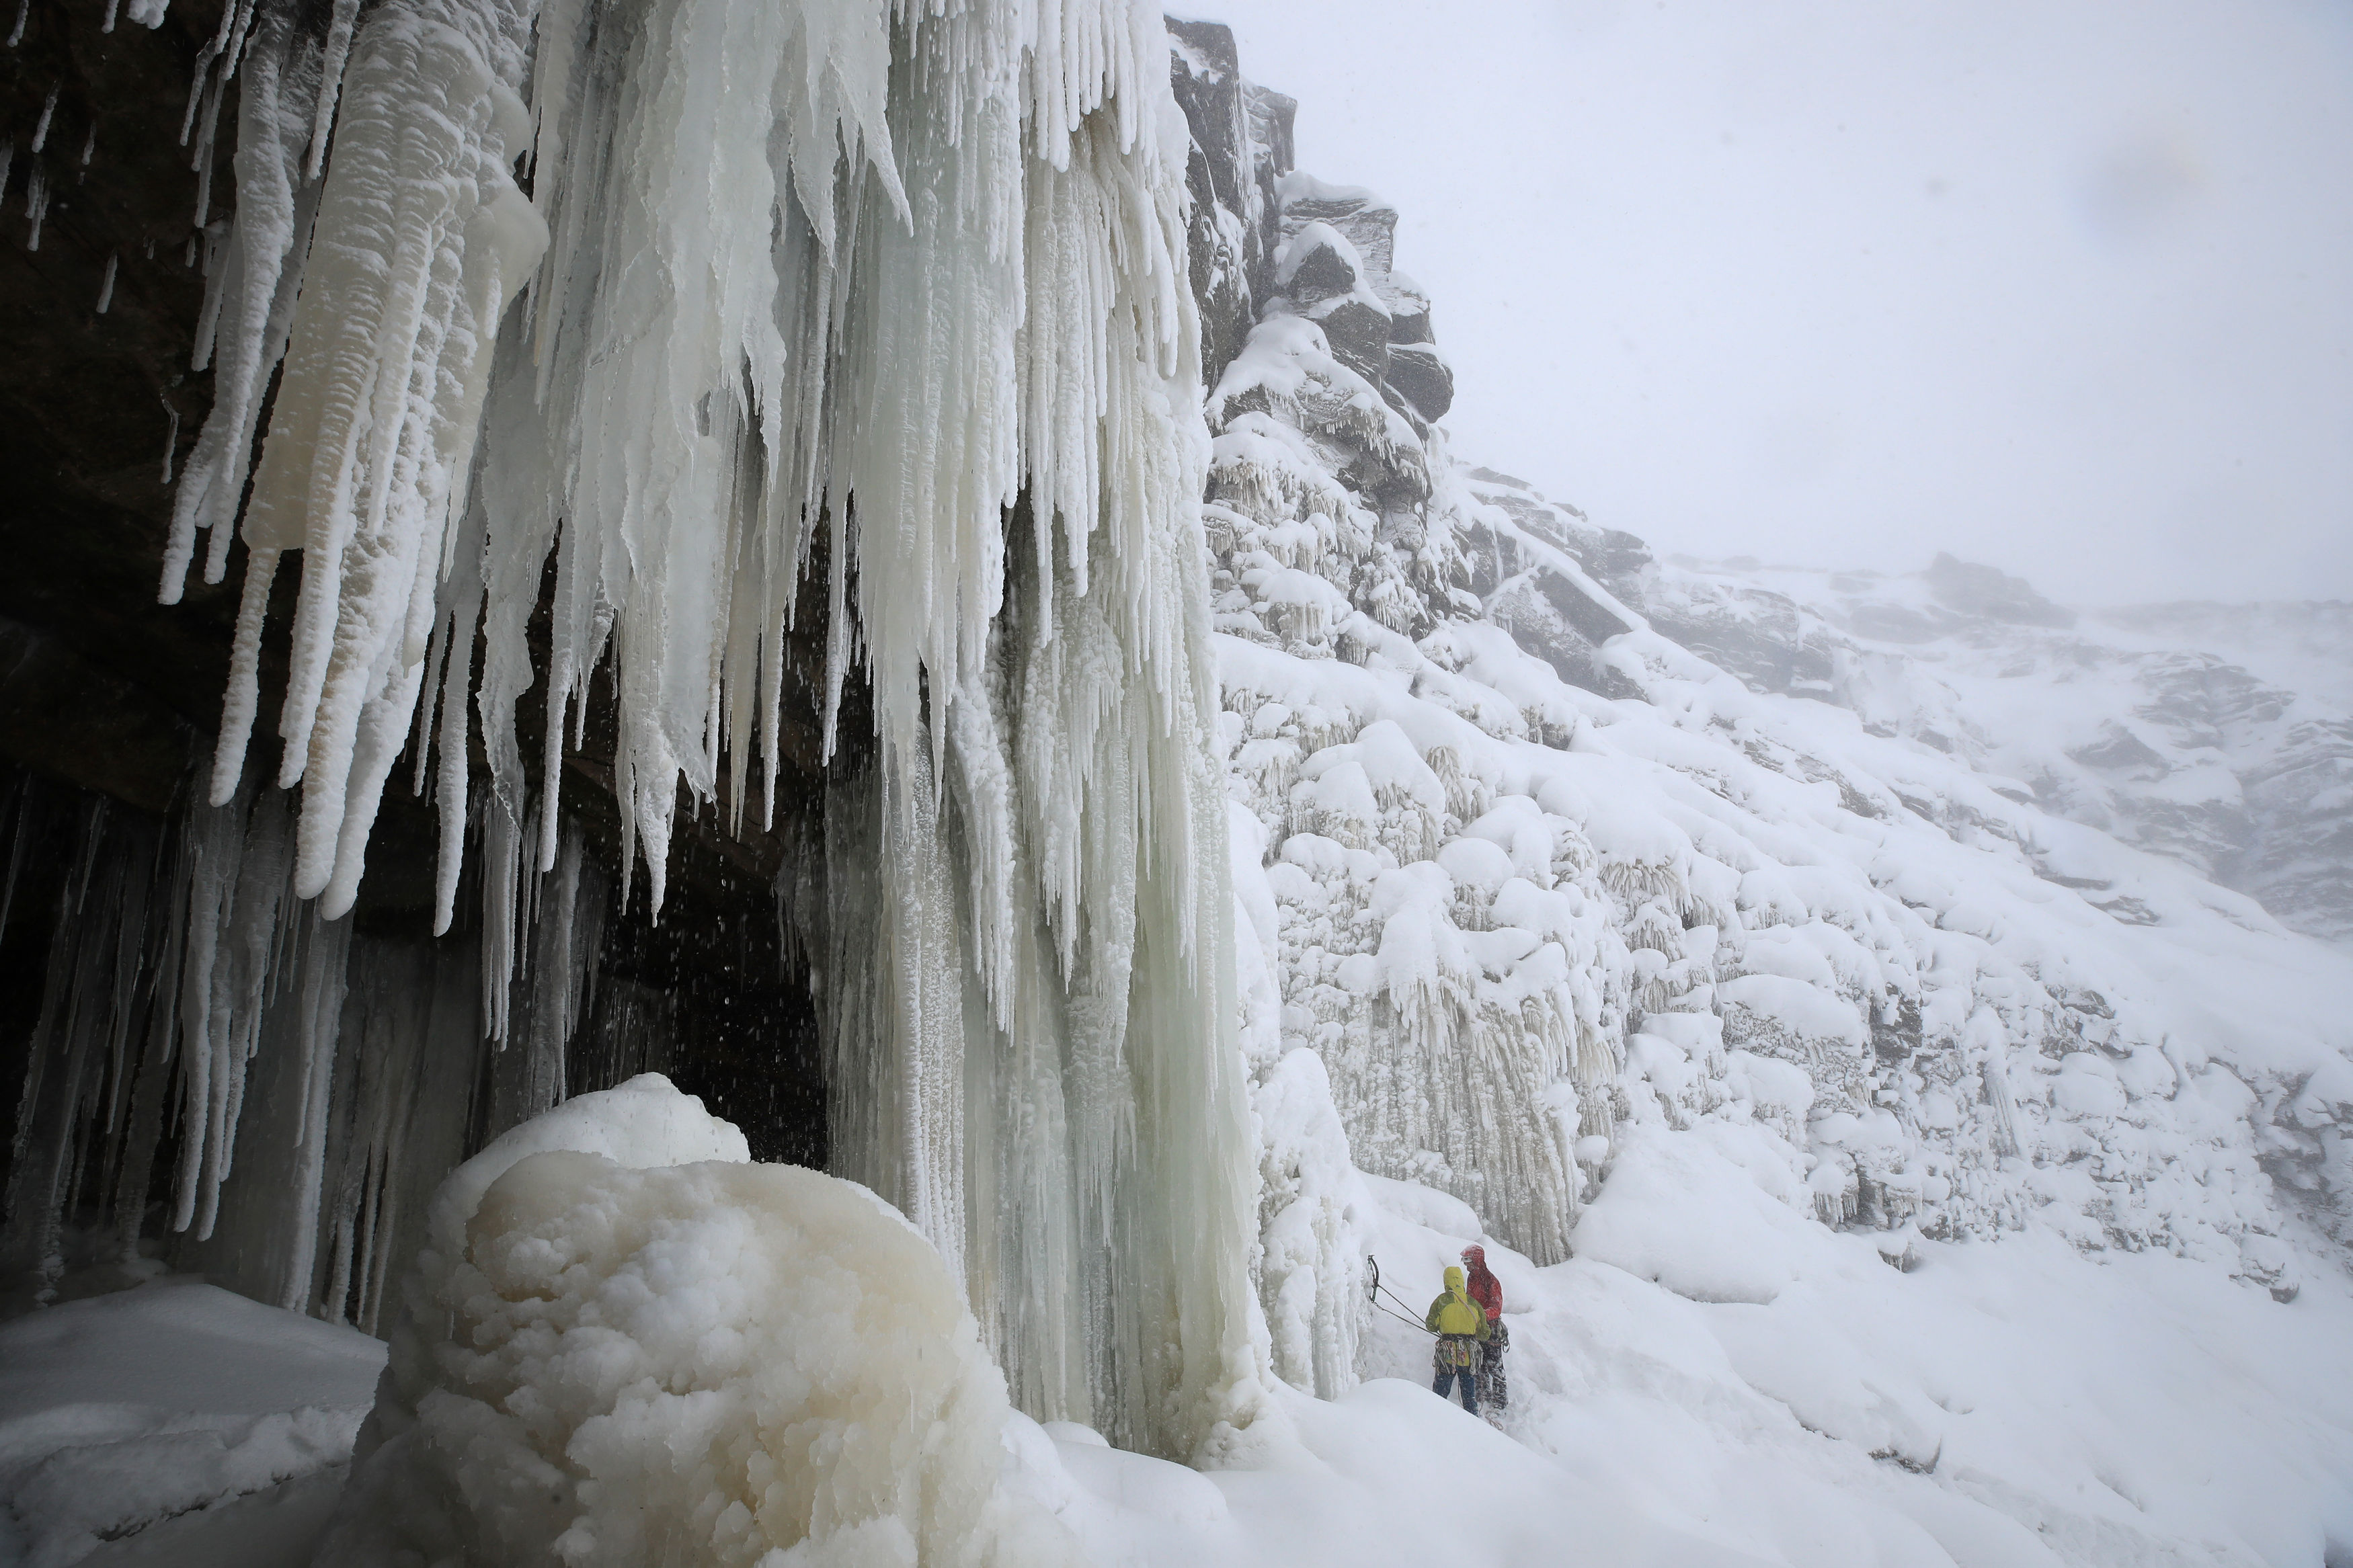 Ice climbers on the downfall at Kinder Downfall, High Peak in Derbyshire